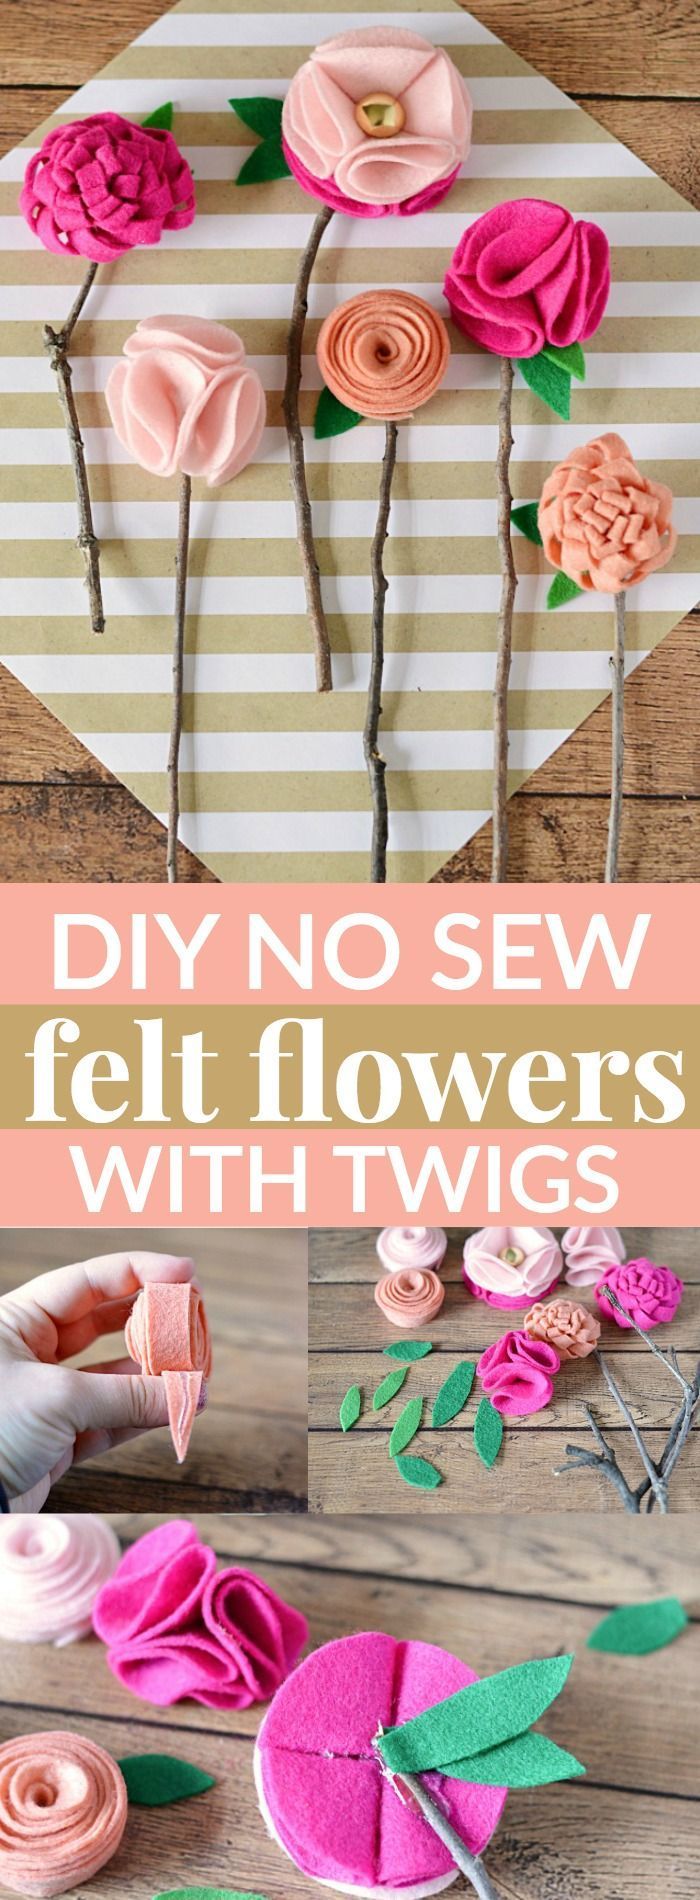 These DIY NO SEW FELT FLOWERS WITH TWIGS are the perfect homemade Mother’s Day...